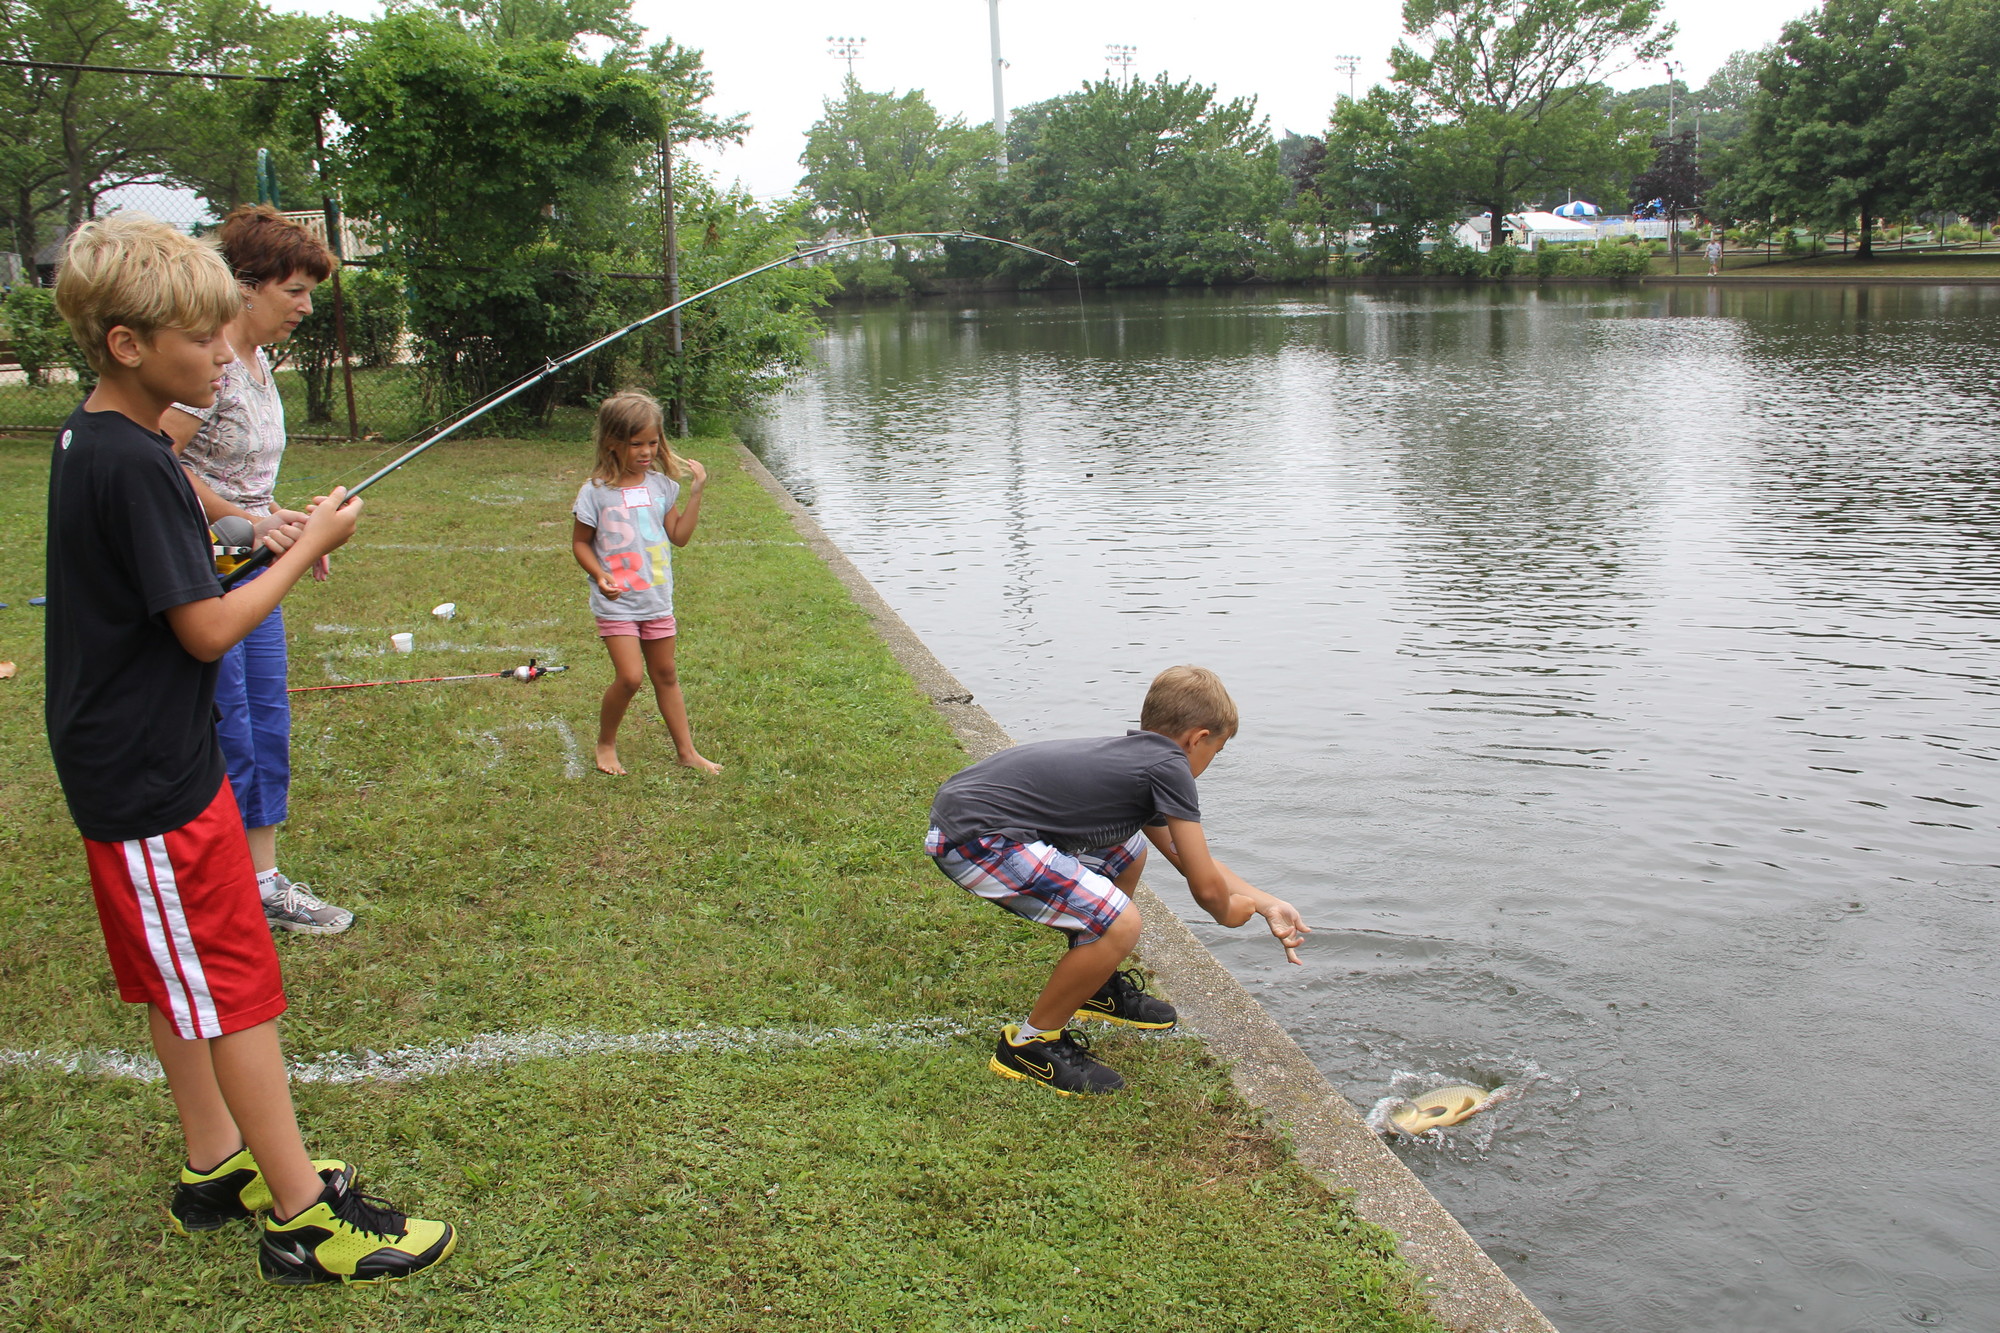 Jesper Dalessandro, 11, reeled in a large bass while his brother Tyler, 9, helped pull it from the water, as their grandmother, Sue, and sister, Molly, 7, watched.